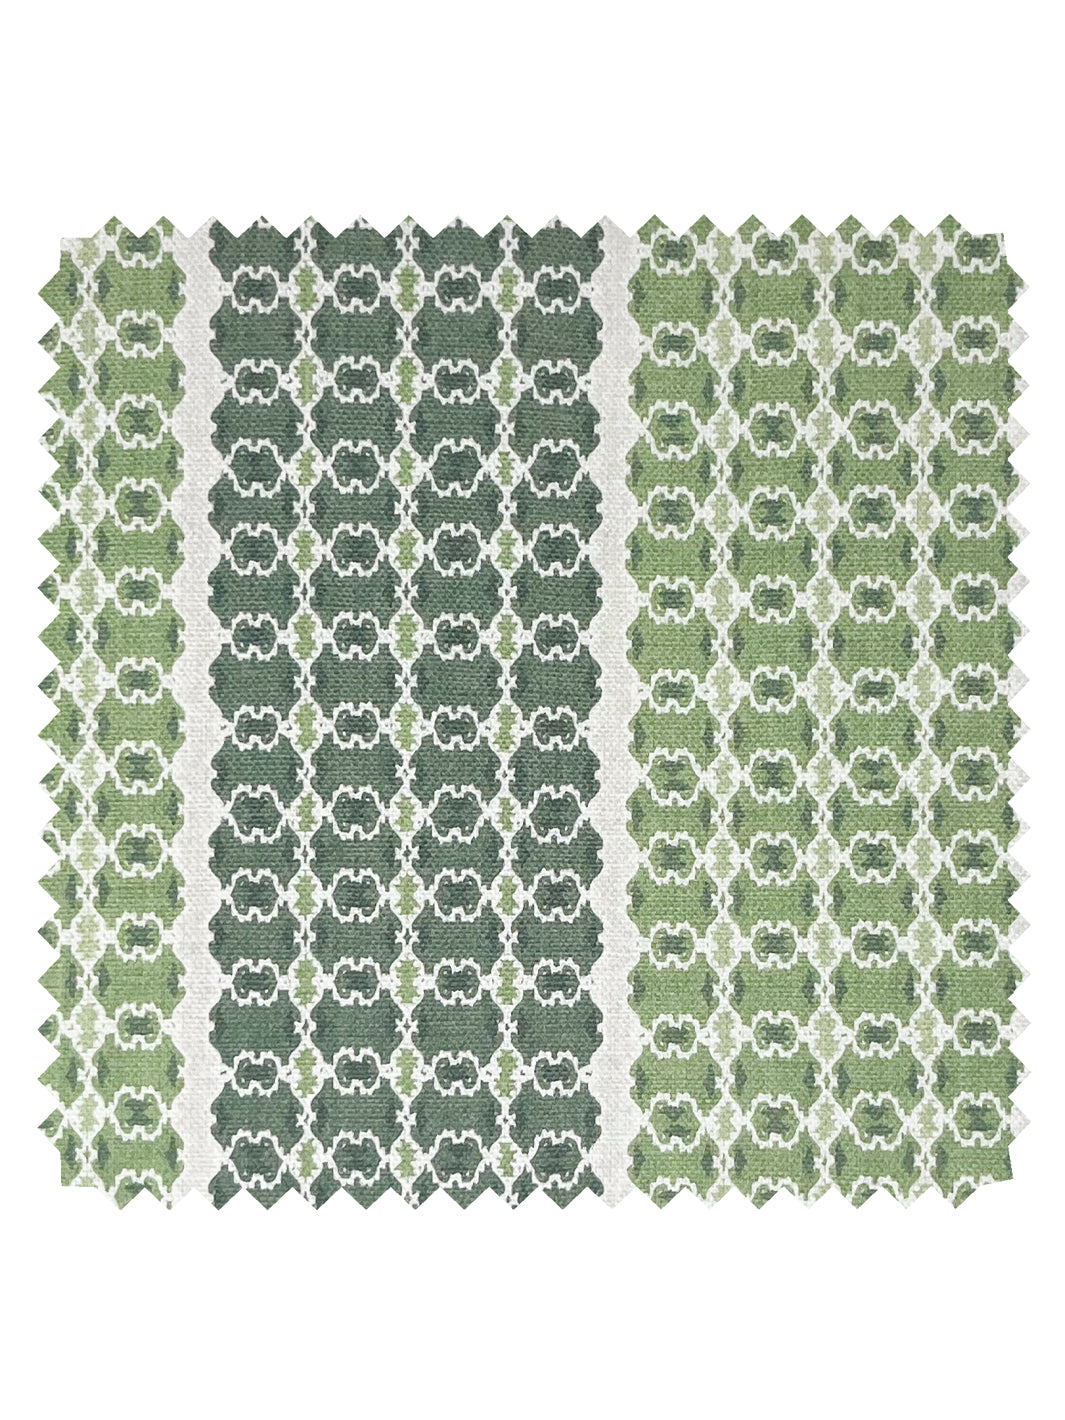 'Medallion Stripe' Linen Fabric by Nathan Turner - Green